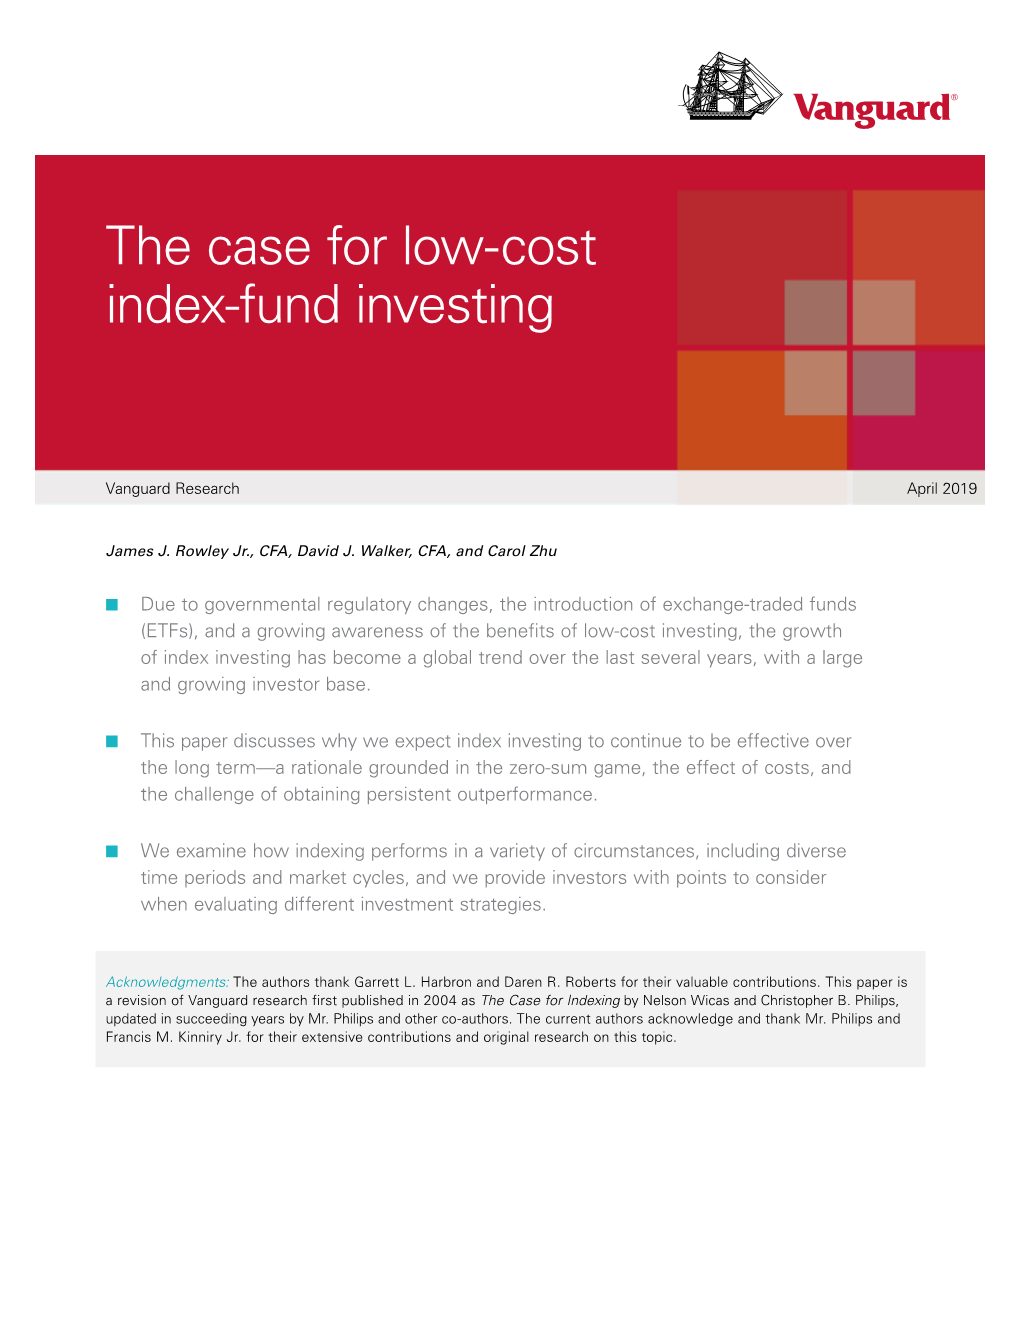 The Case for Low-Cost Index-Fund Investing